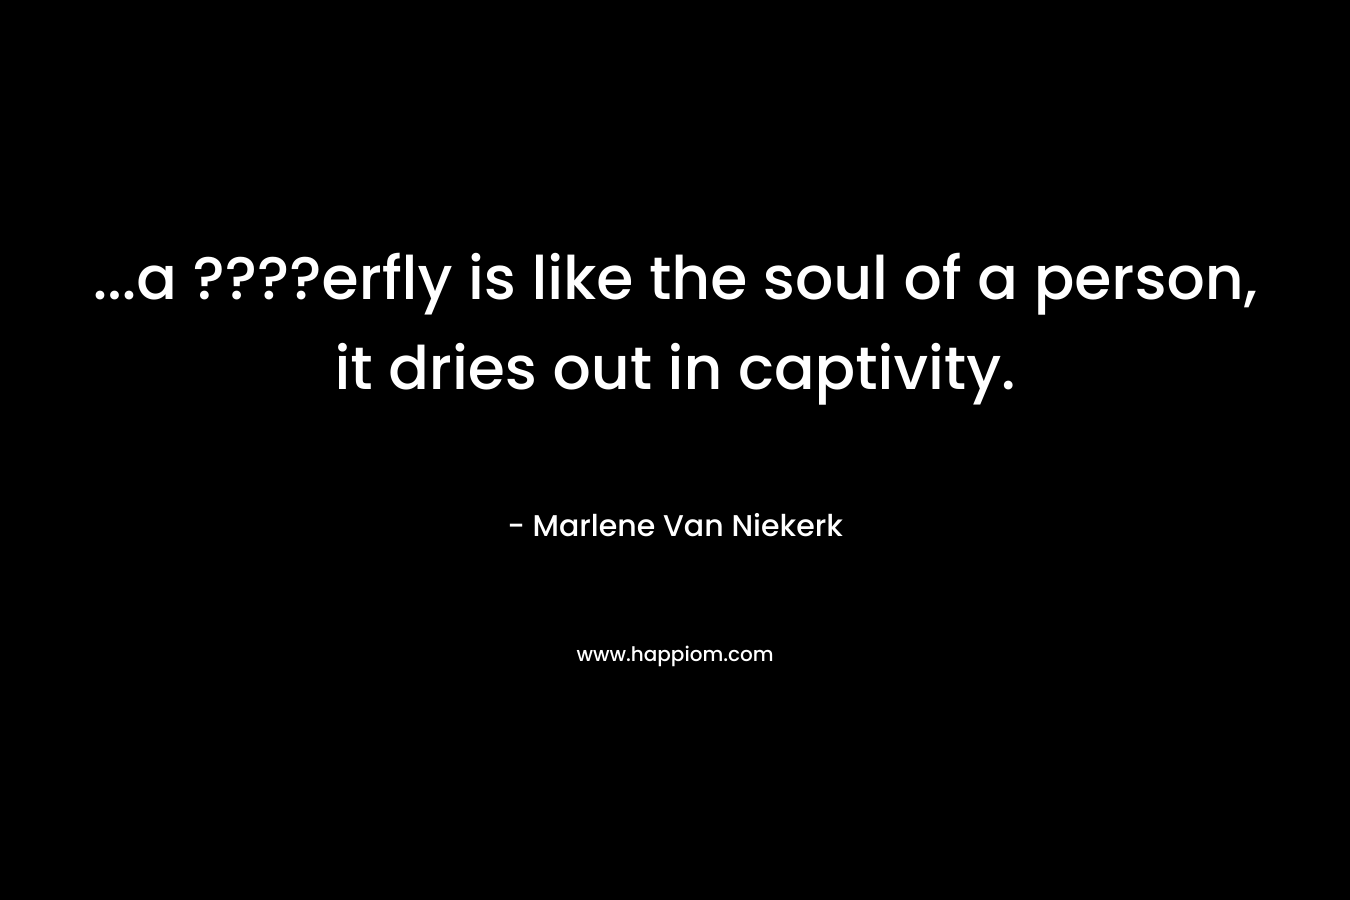 …a ????erfly is like the soul of a person, it dries out in captivity. – Marlene Van Niekerk